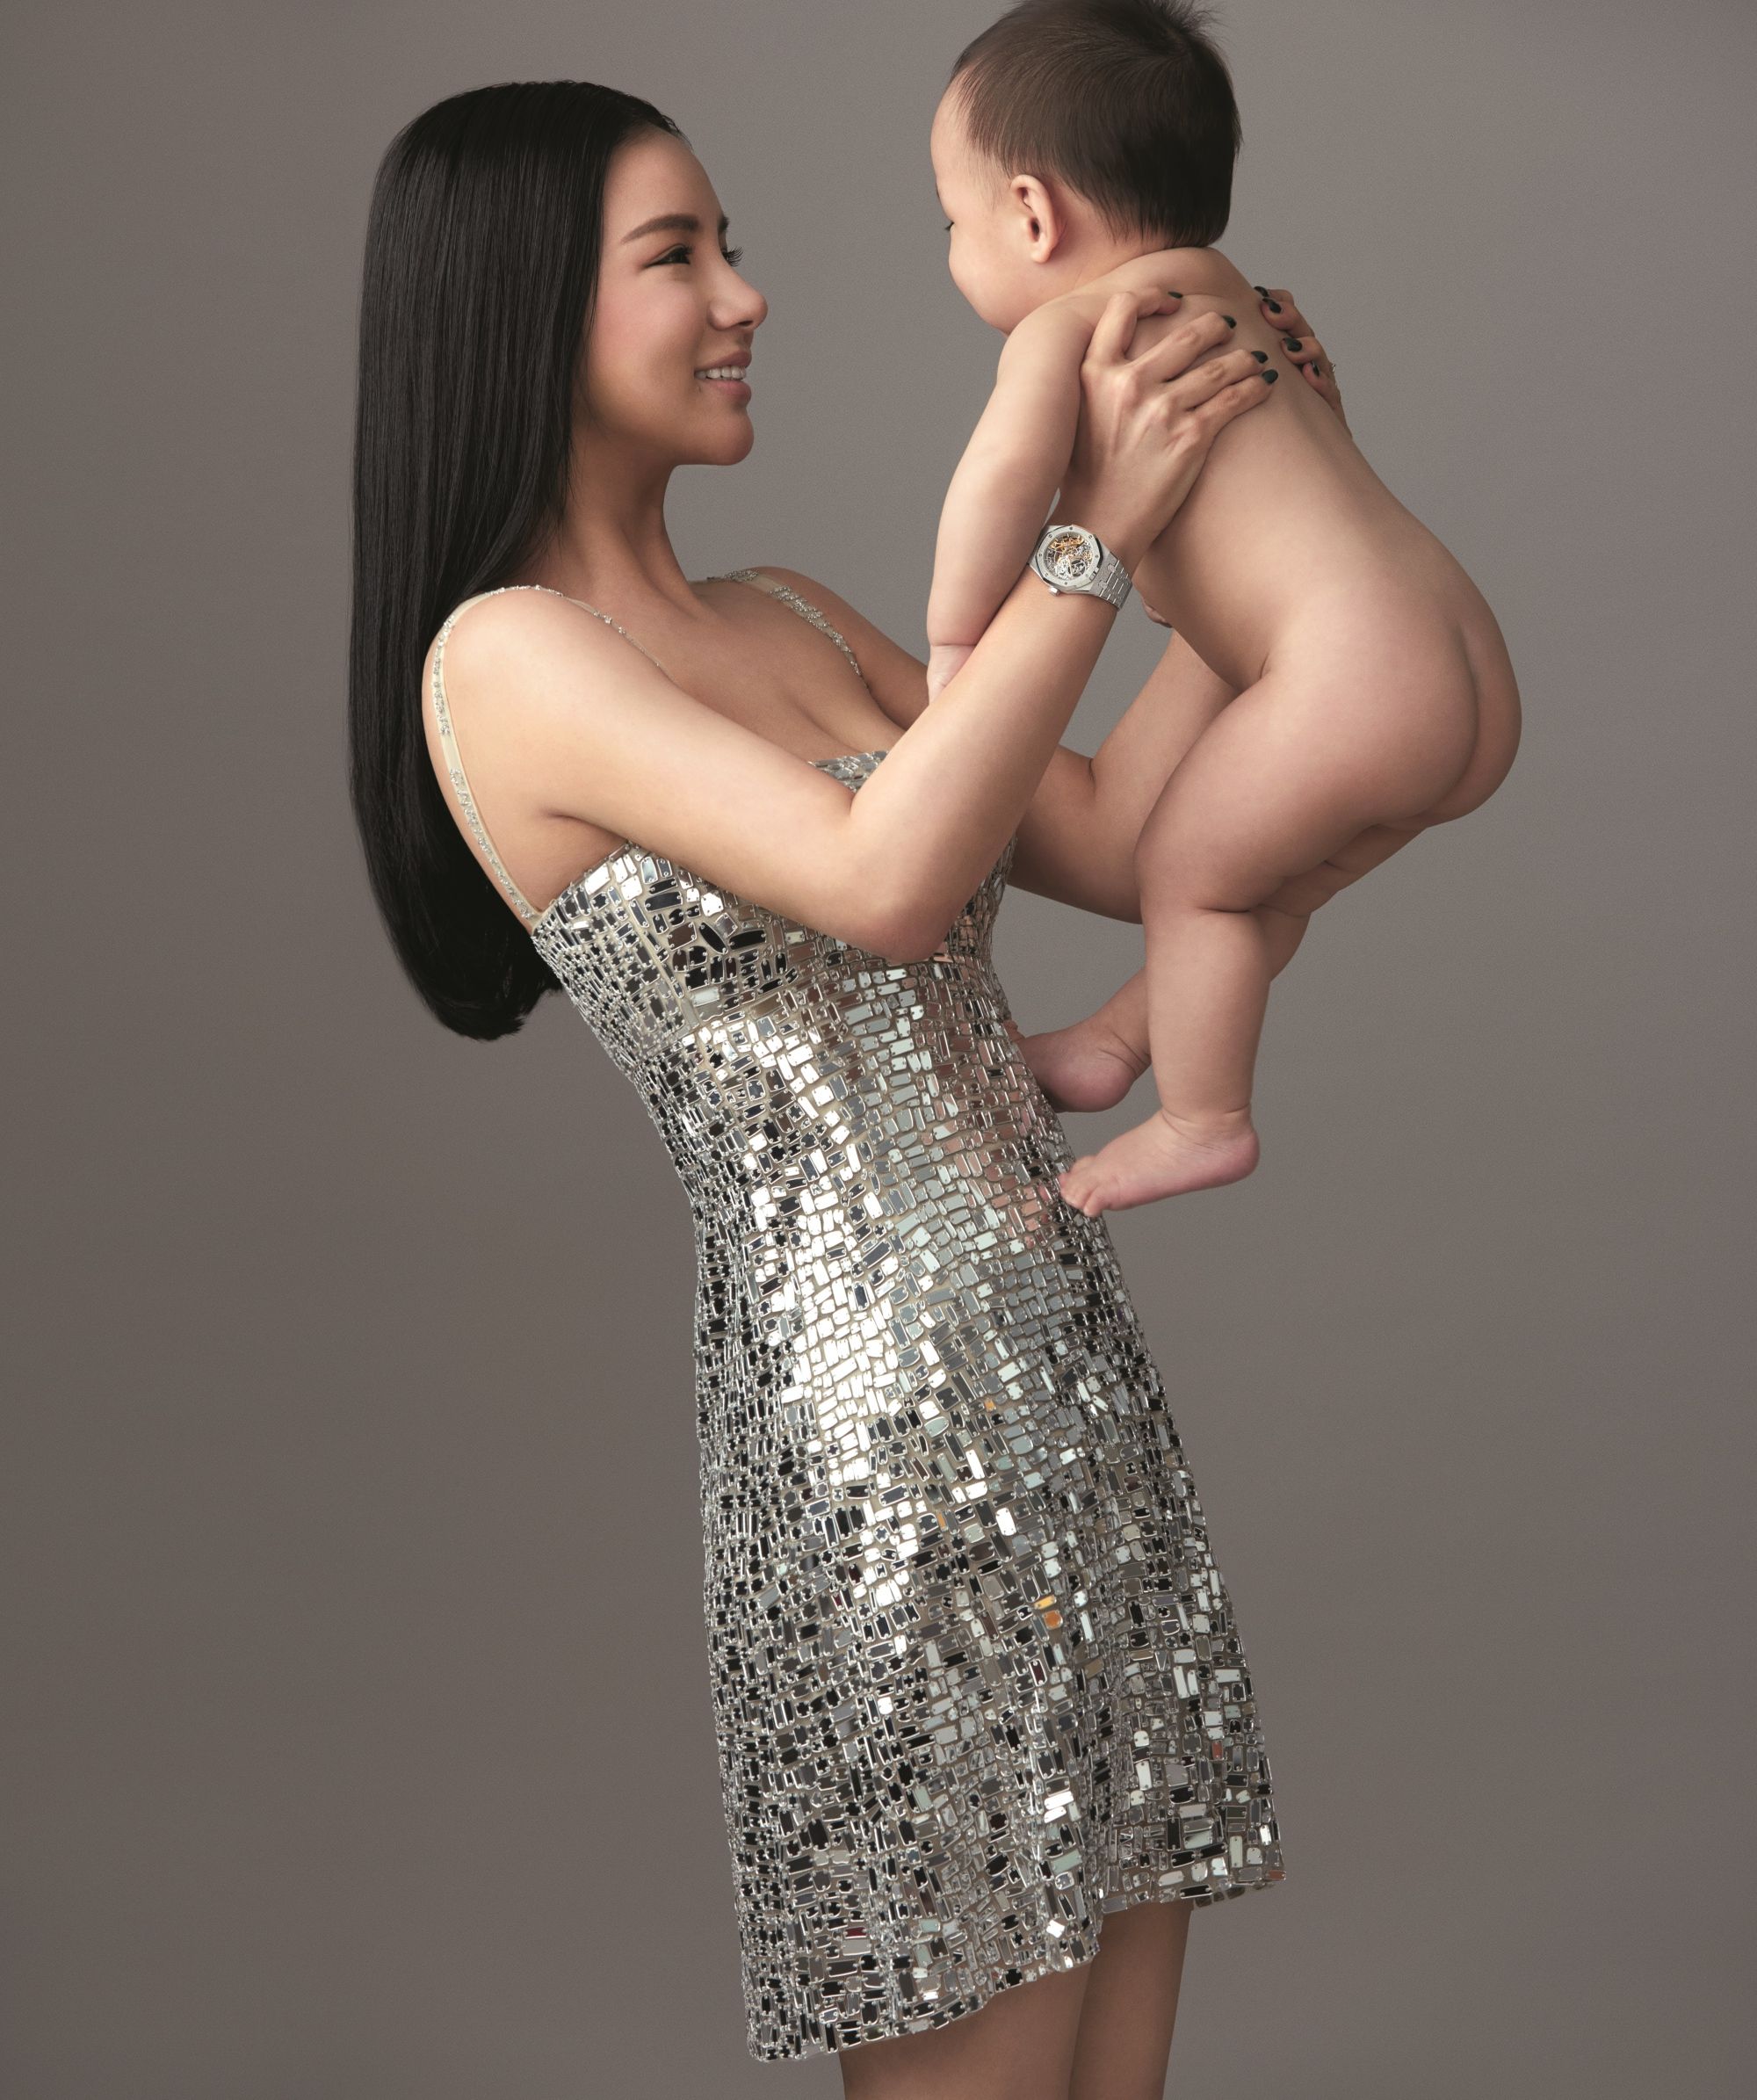 Kim Lim On Why She Hid Her Baby Bump And Life As A New Mum